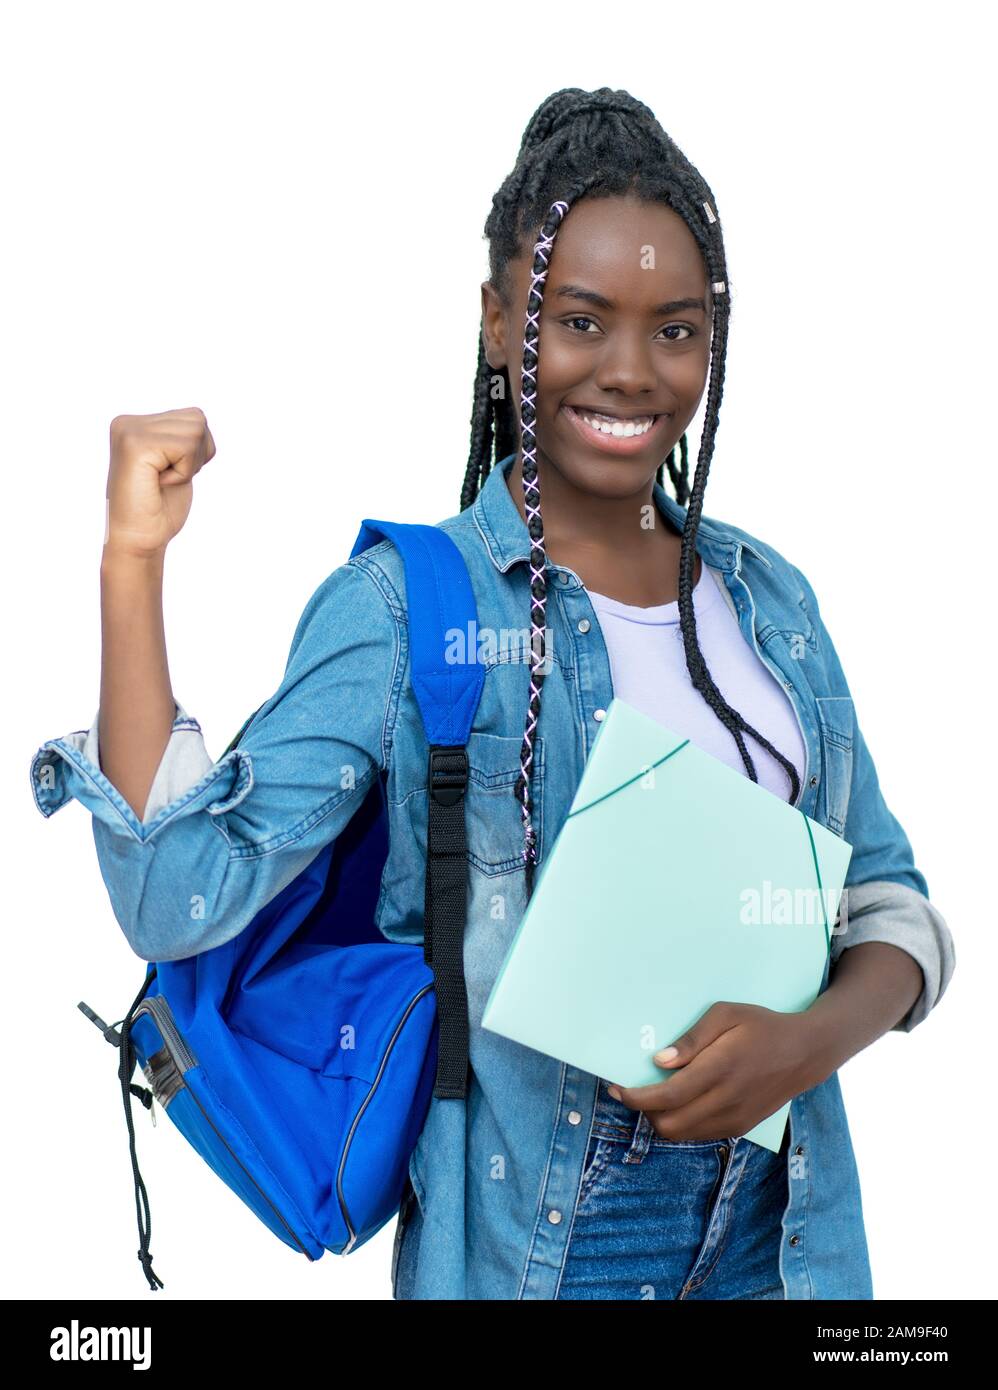 Cheering african female student with dreadlocks on isolated white background for cut out Stock Photo